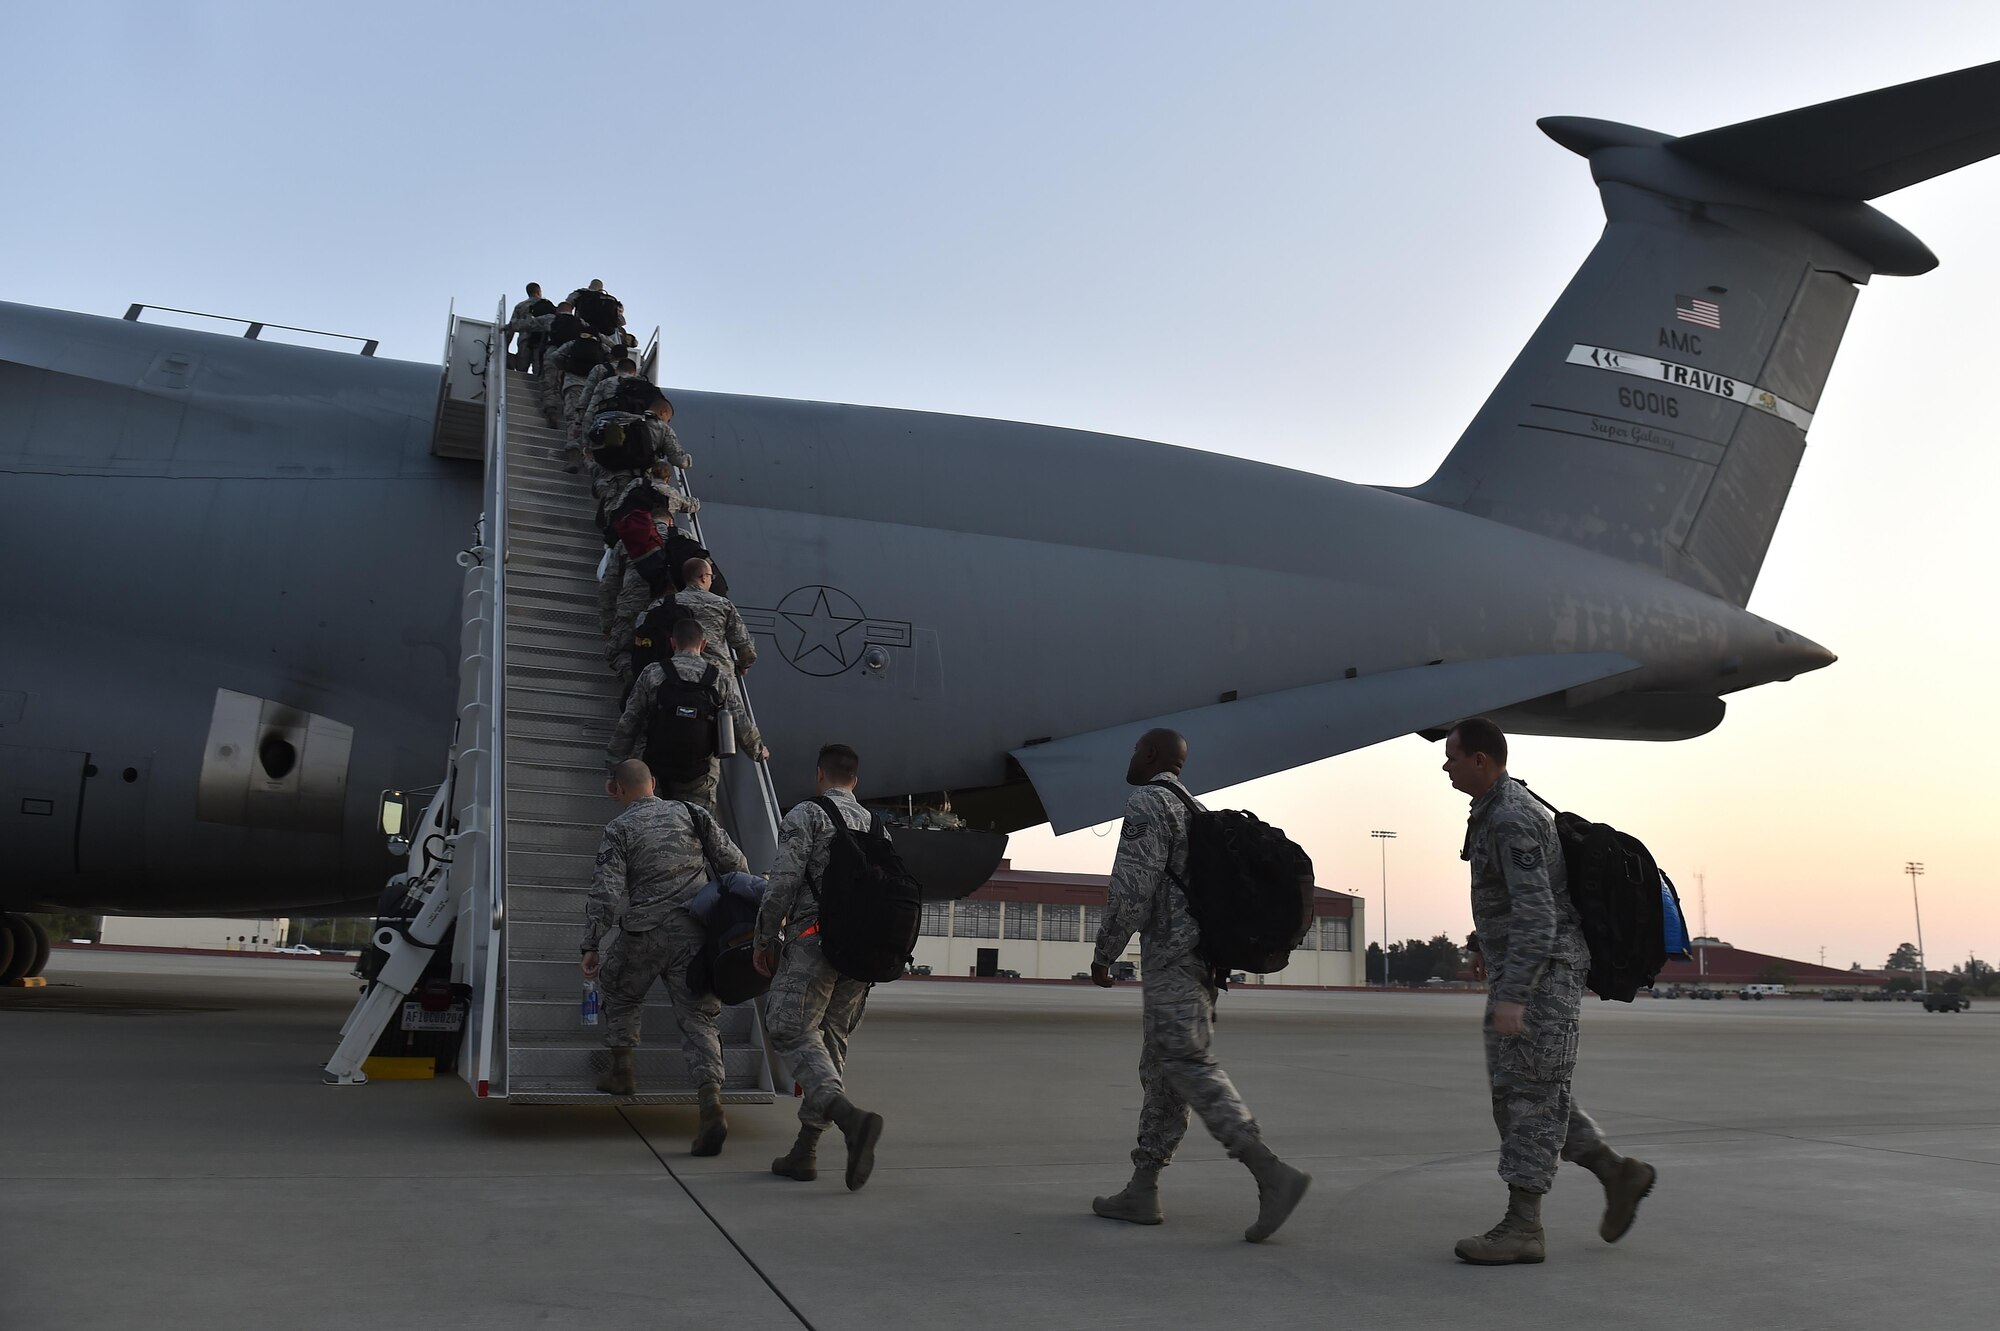 Airmen from the 821st Contingency Response Group board a C-5M Super Galaxy, September 9, 2017, at Travis Airforce Base, Calif.  Two contingency response teams from the 821st Contingency Response Group at Travis Airforce Base, Calif., and a third from the 621st Contingency Response Group at Joint Base McGuire-Dix-Lakehurst, N.J. prepositioned at Scott AFB, to await forward deployment to support ongoing relief efforts in the wake of Hurricane Irma.  (U.S. Air Force photo by Tech. Sgt. Liliana Moreno/Released)